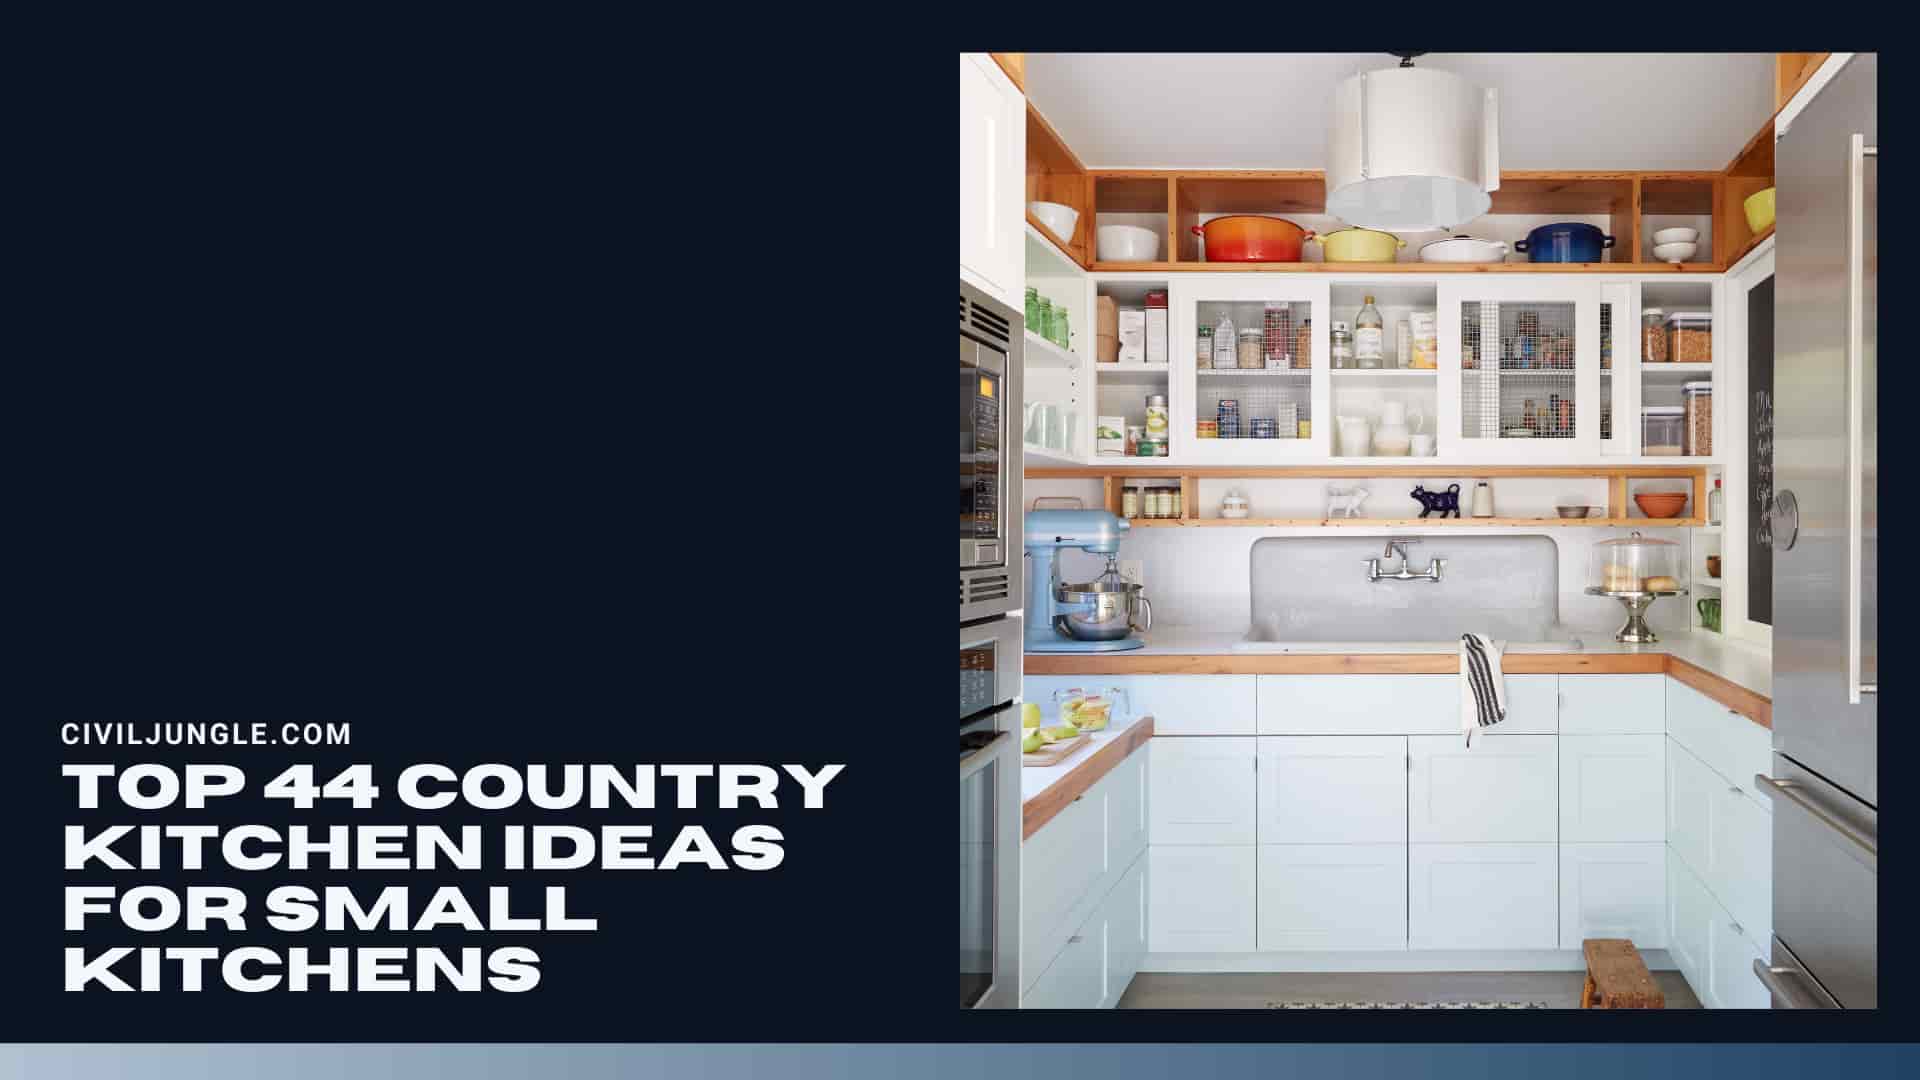 Top 44 Country Kitchen Ideas for Small Kitchens